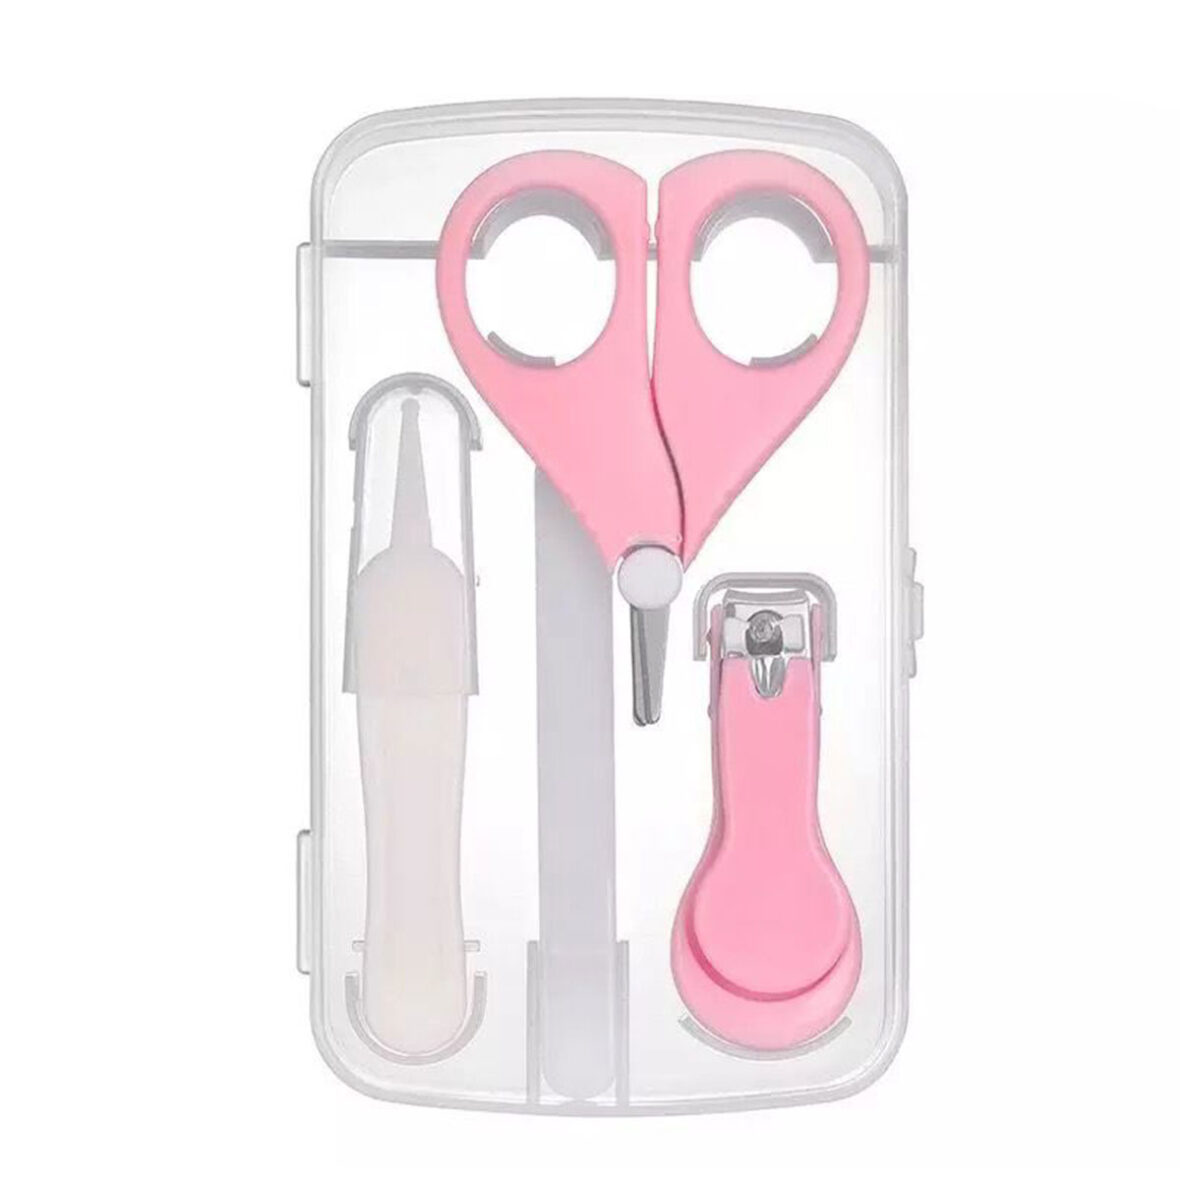 Baby Care Tools Set